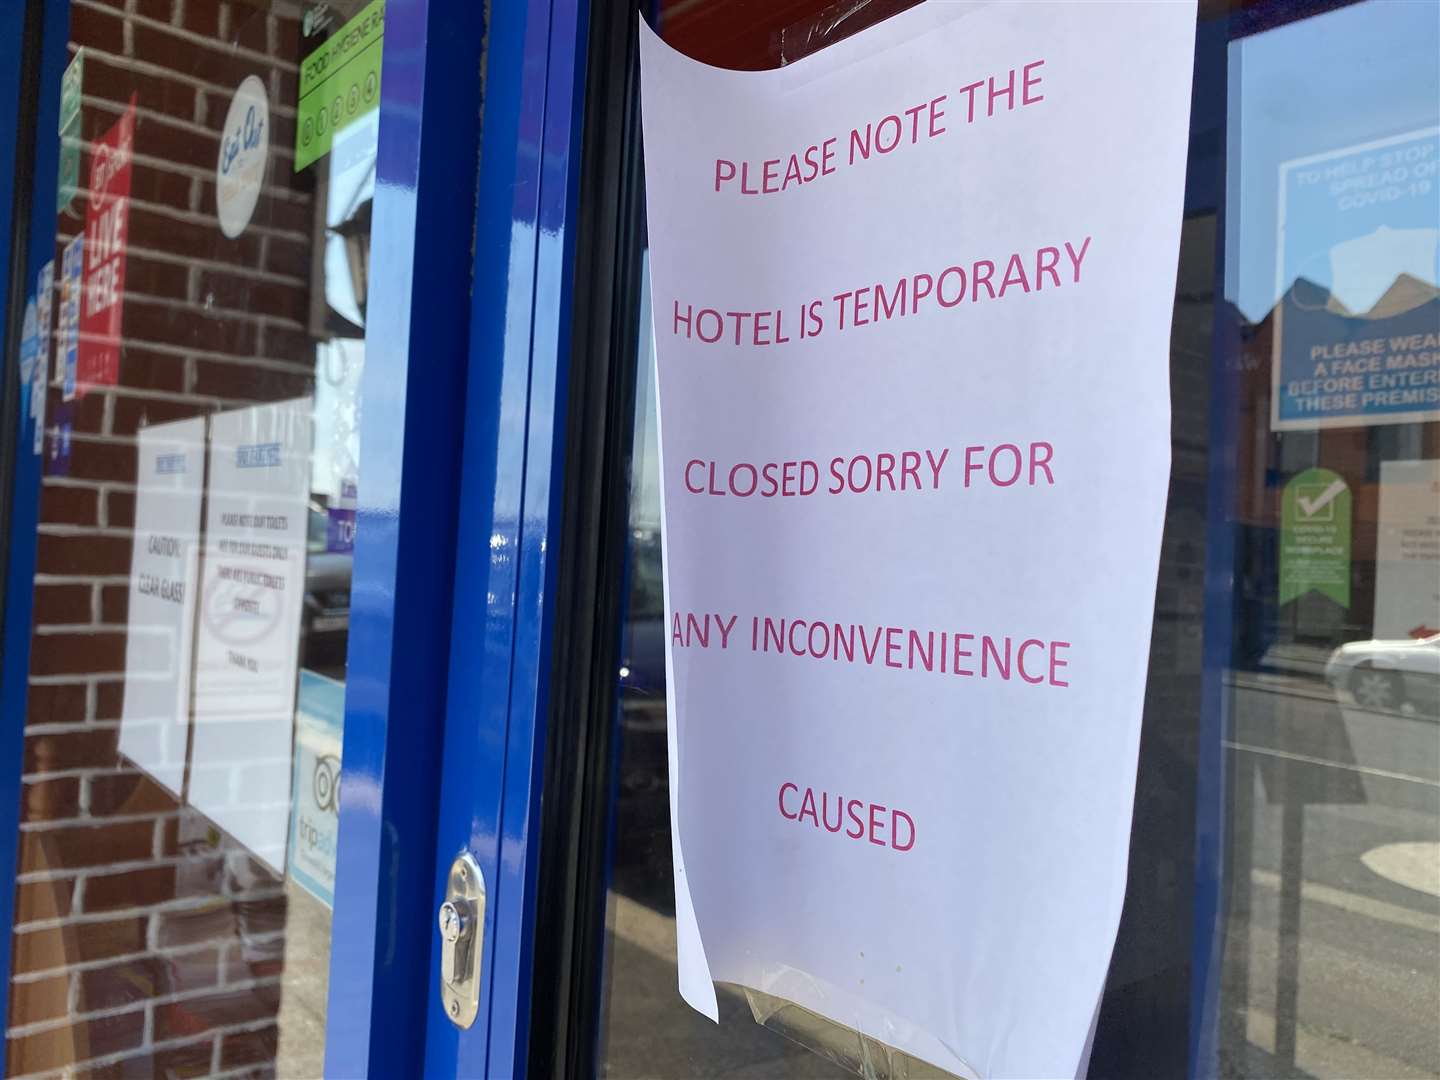 It is not known how long the hotel will be closed for